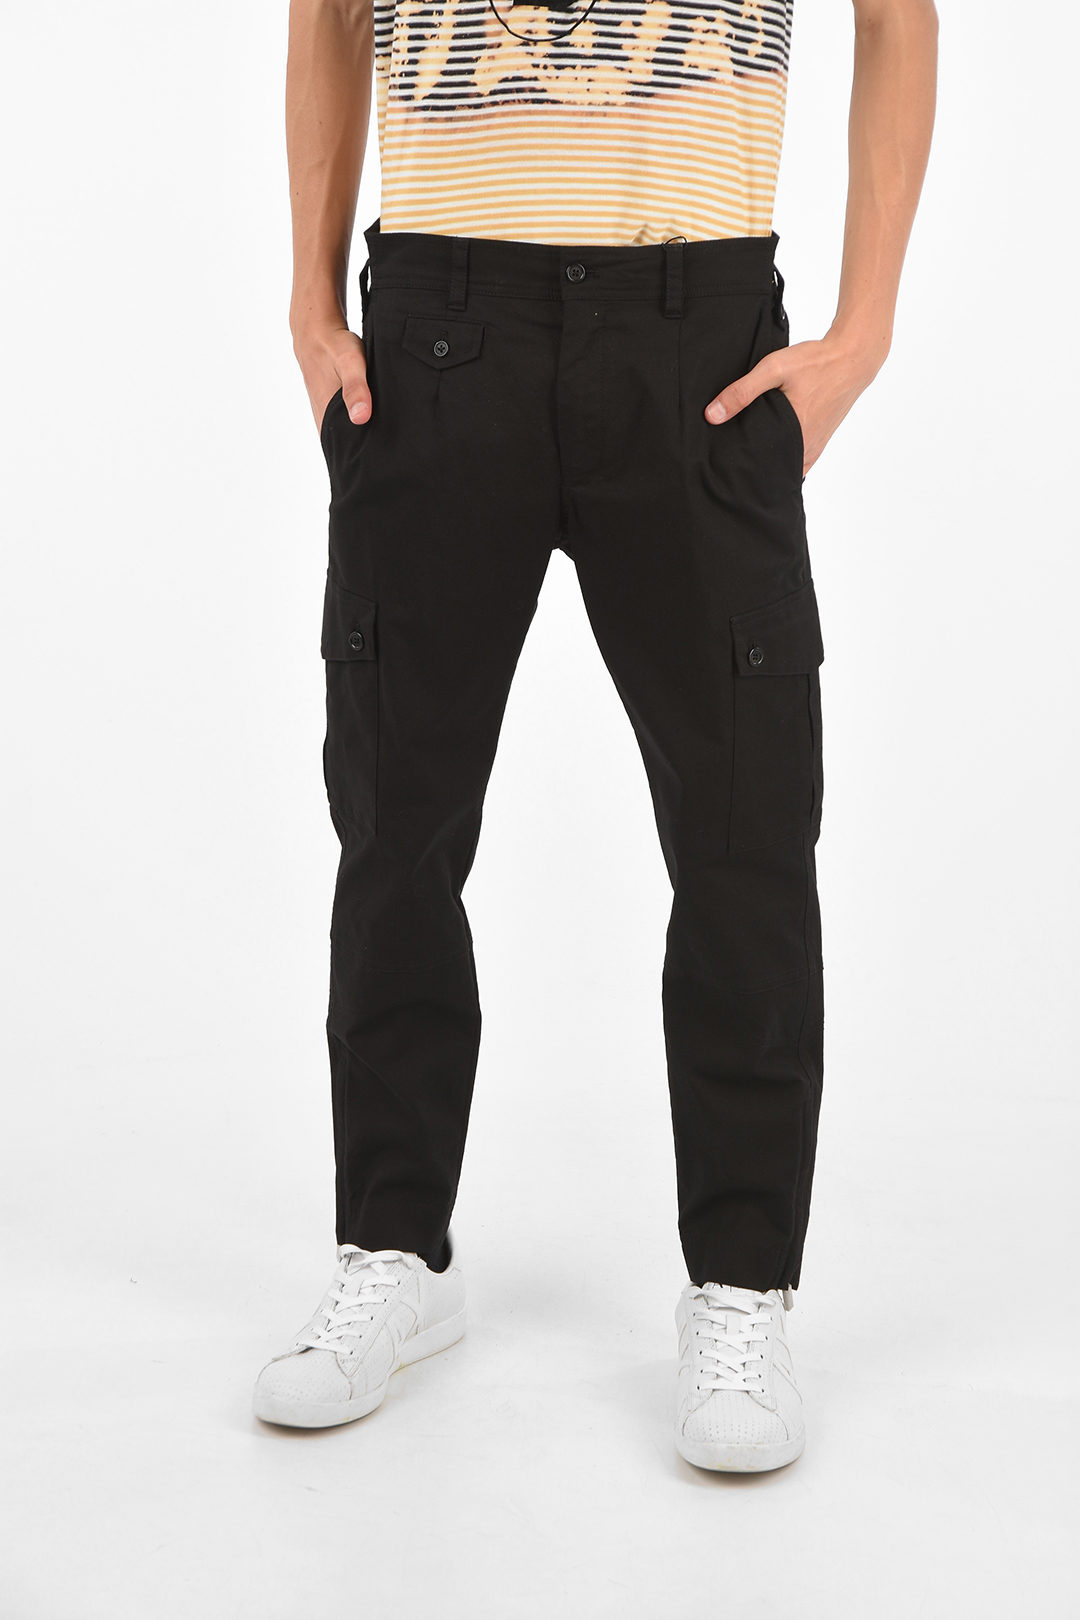 Dolce & Gabbana Stretch Cotton Cargo Pants with Belt Loops men ...